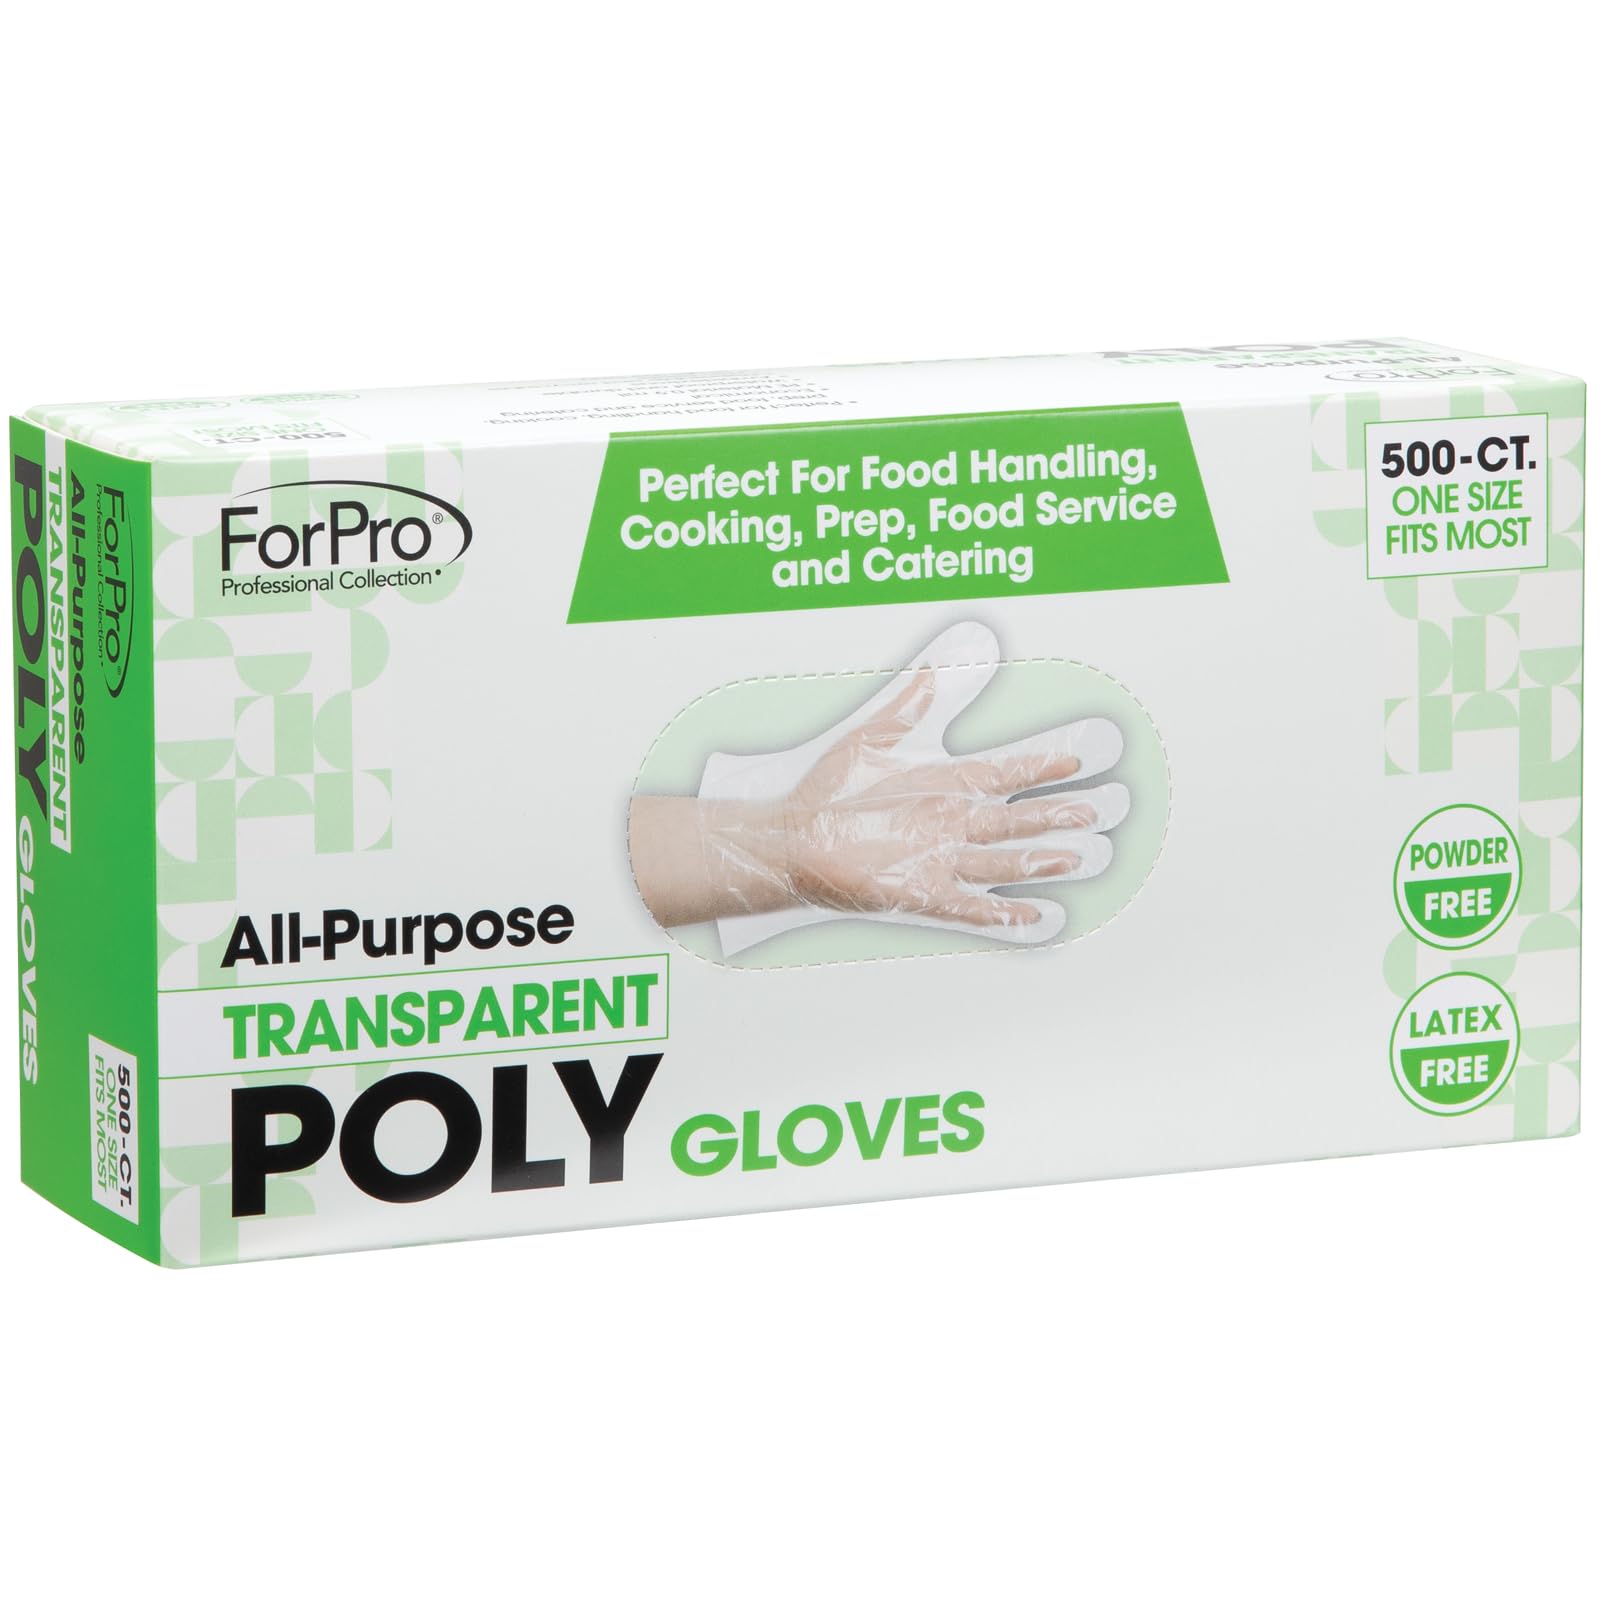 ForPro Disposable Poly Plastic Gloves, All-Purpose Food Safe Gloves for Cooking, Food Handling, Food Prep, Latex-Free, Non-Sterile, Clear, One Size, 500-Count